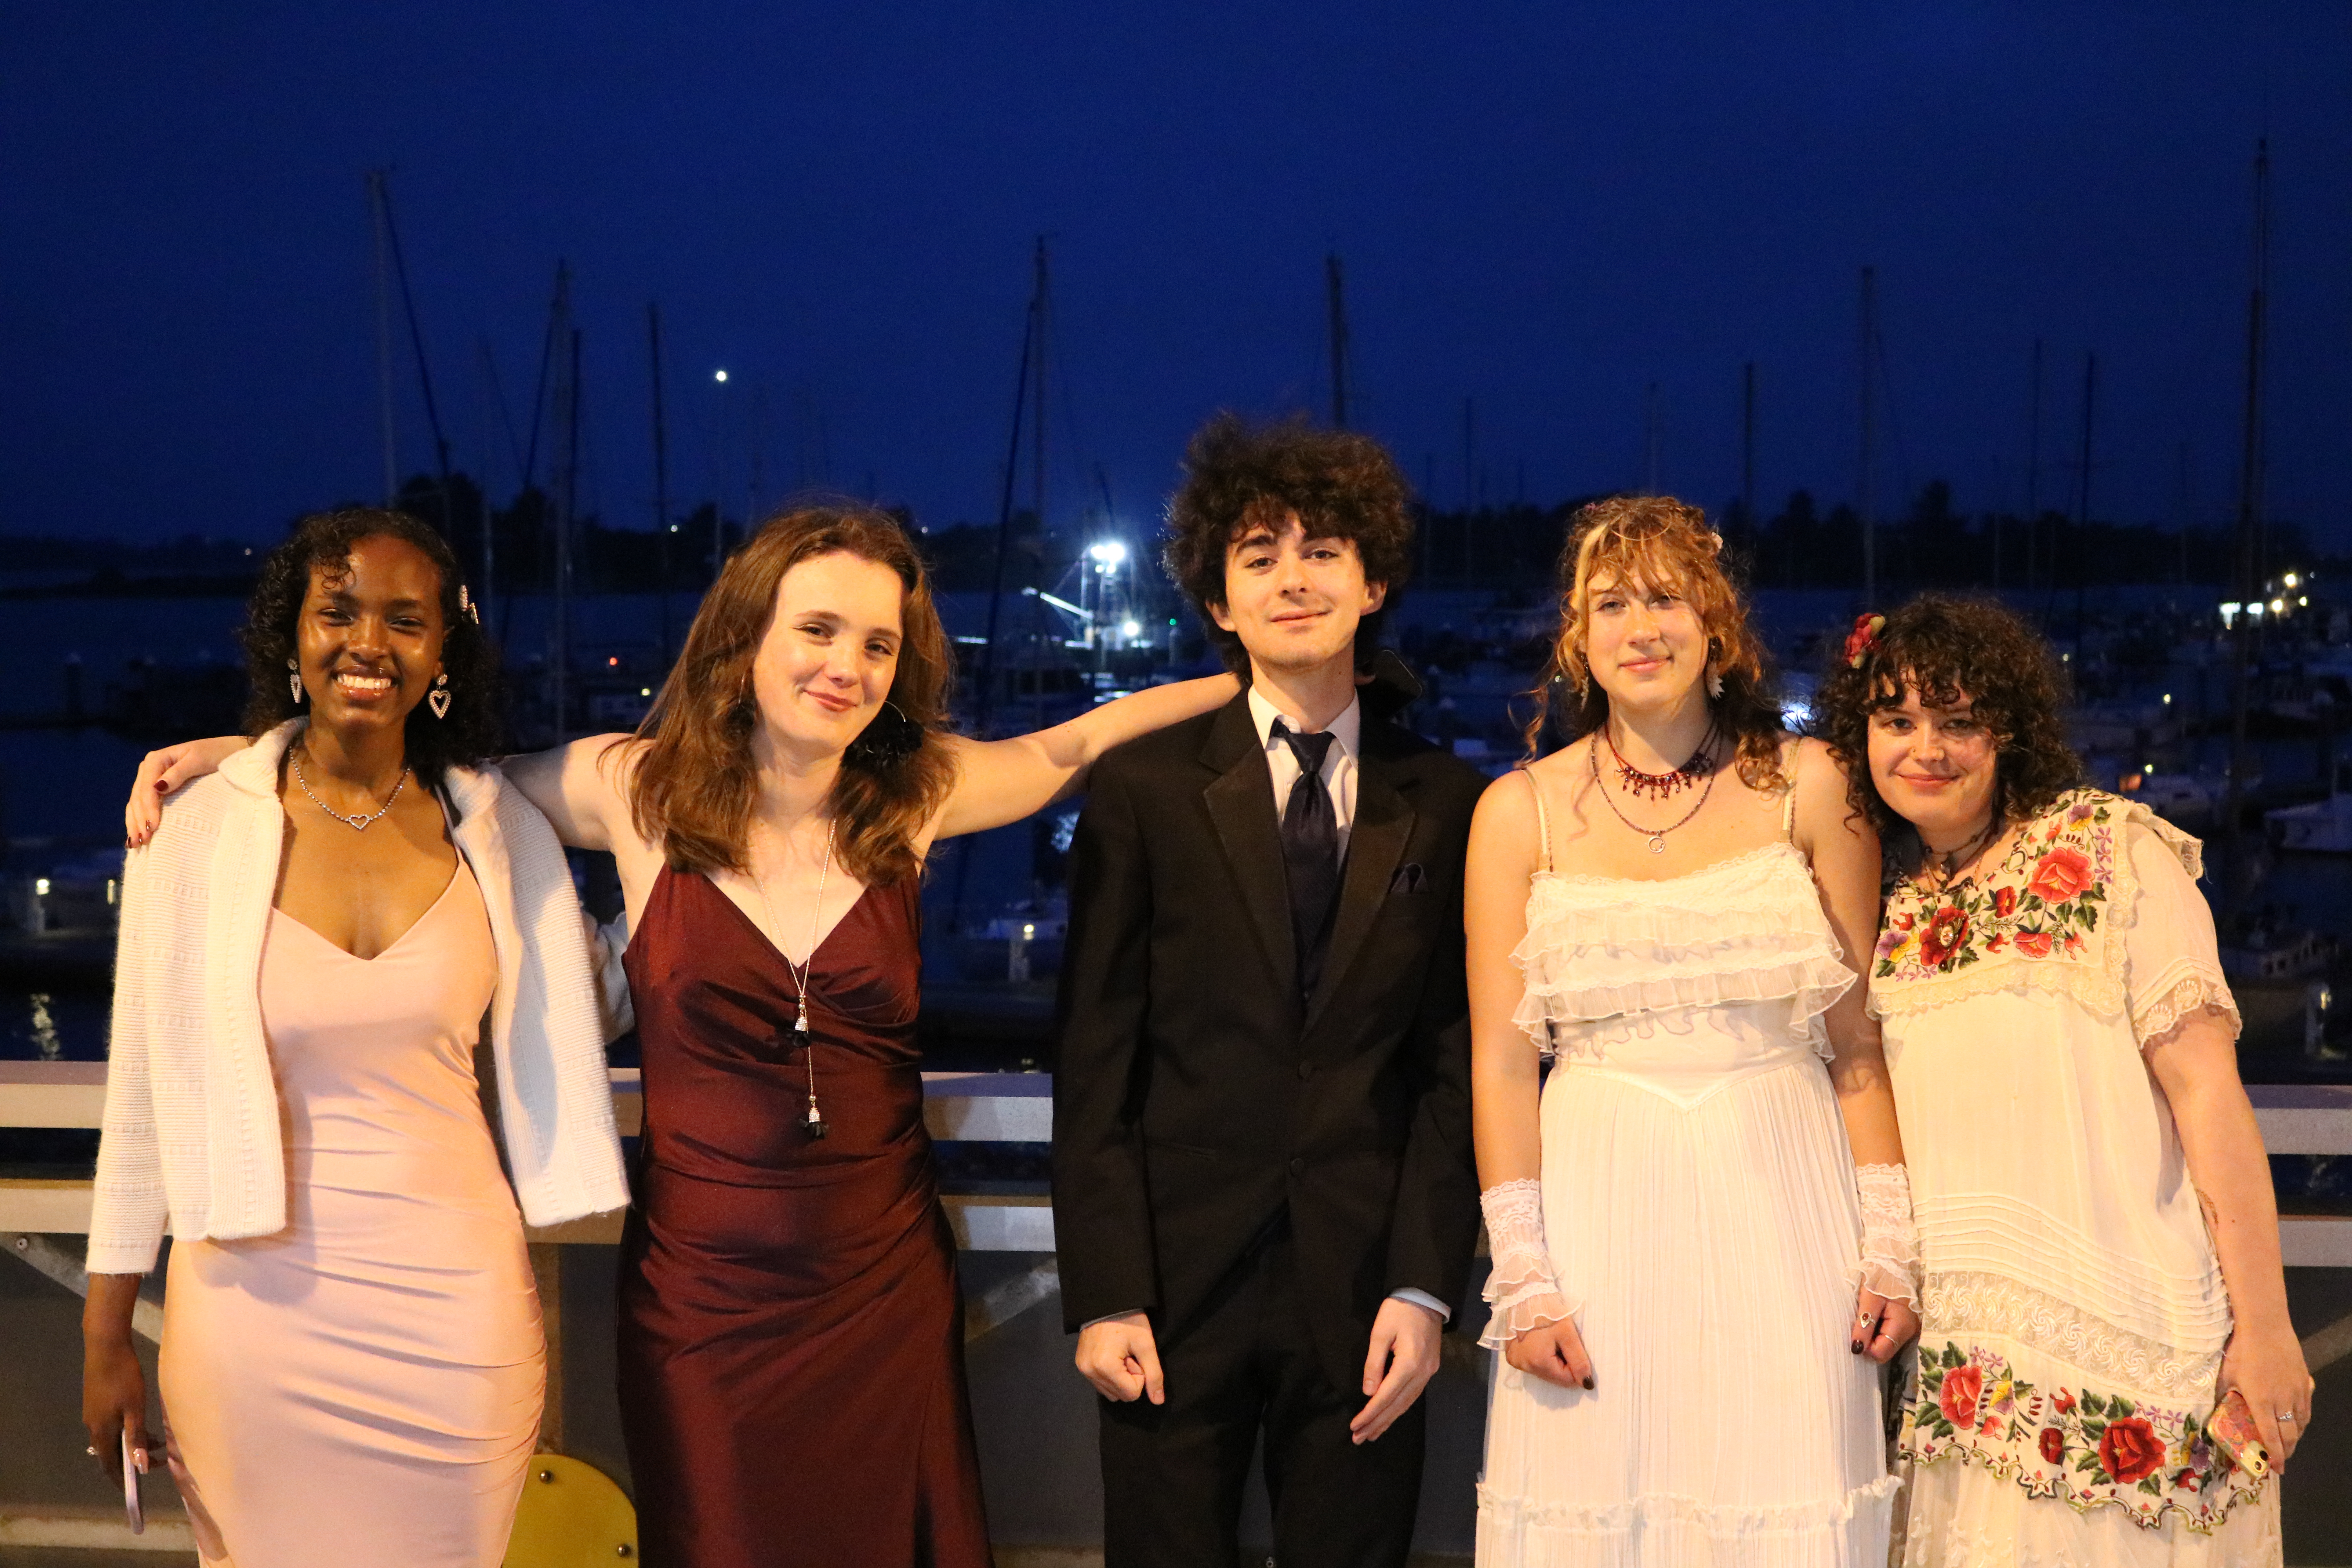 Students smile together in formal dresses and tuxedos during the annual Cotillion Ball at NPA.